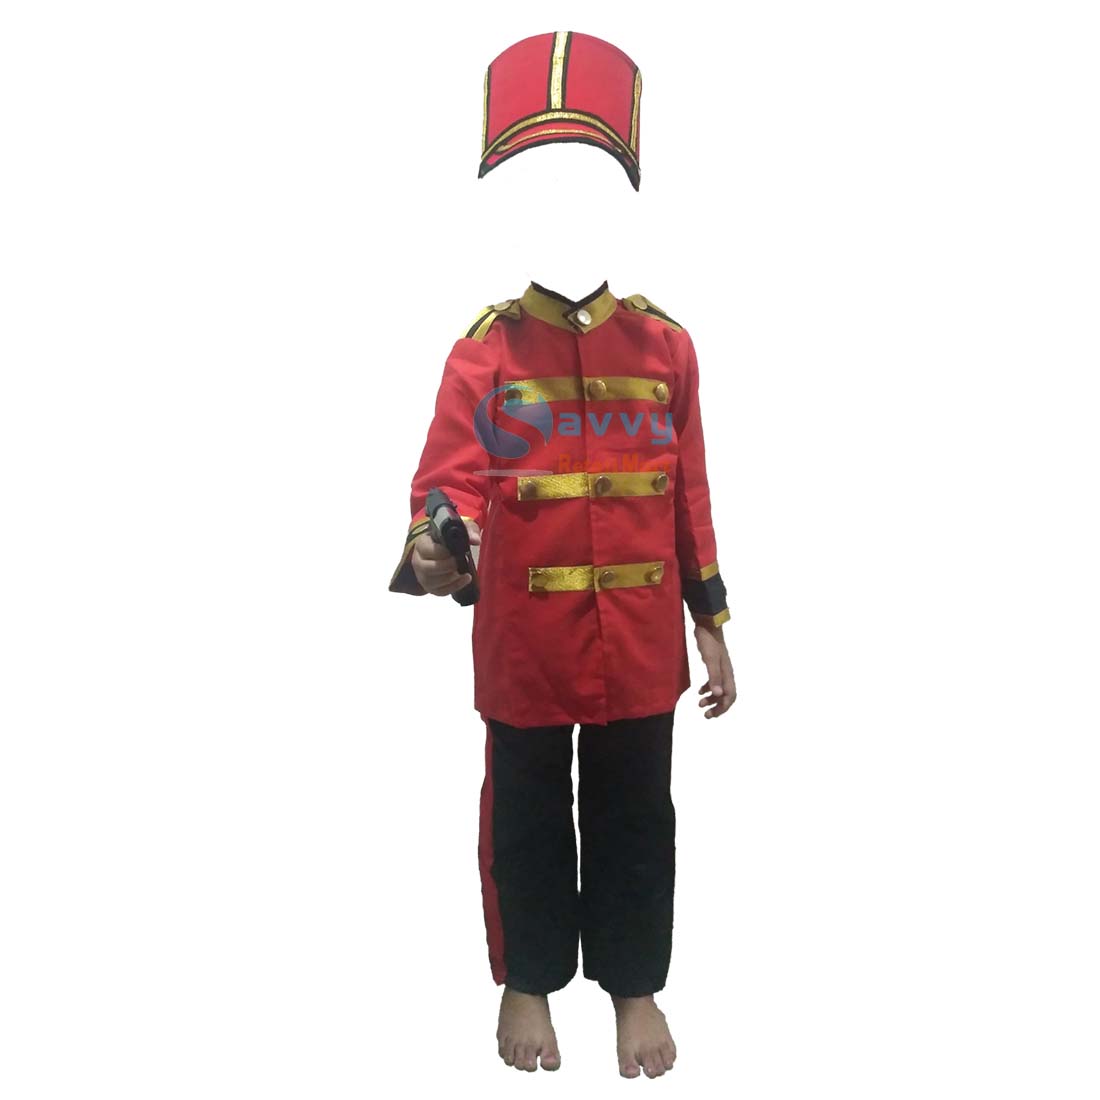 Freedom Fighter Mangal Pandey Red Hat at Rs 199/piece | कॉस्टयूम एक्सेसरीज  in Greater Noida | ID: 23498706733